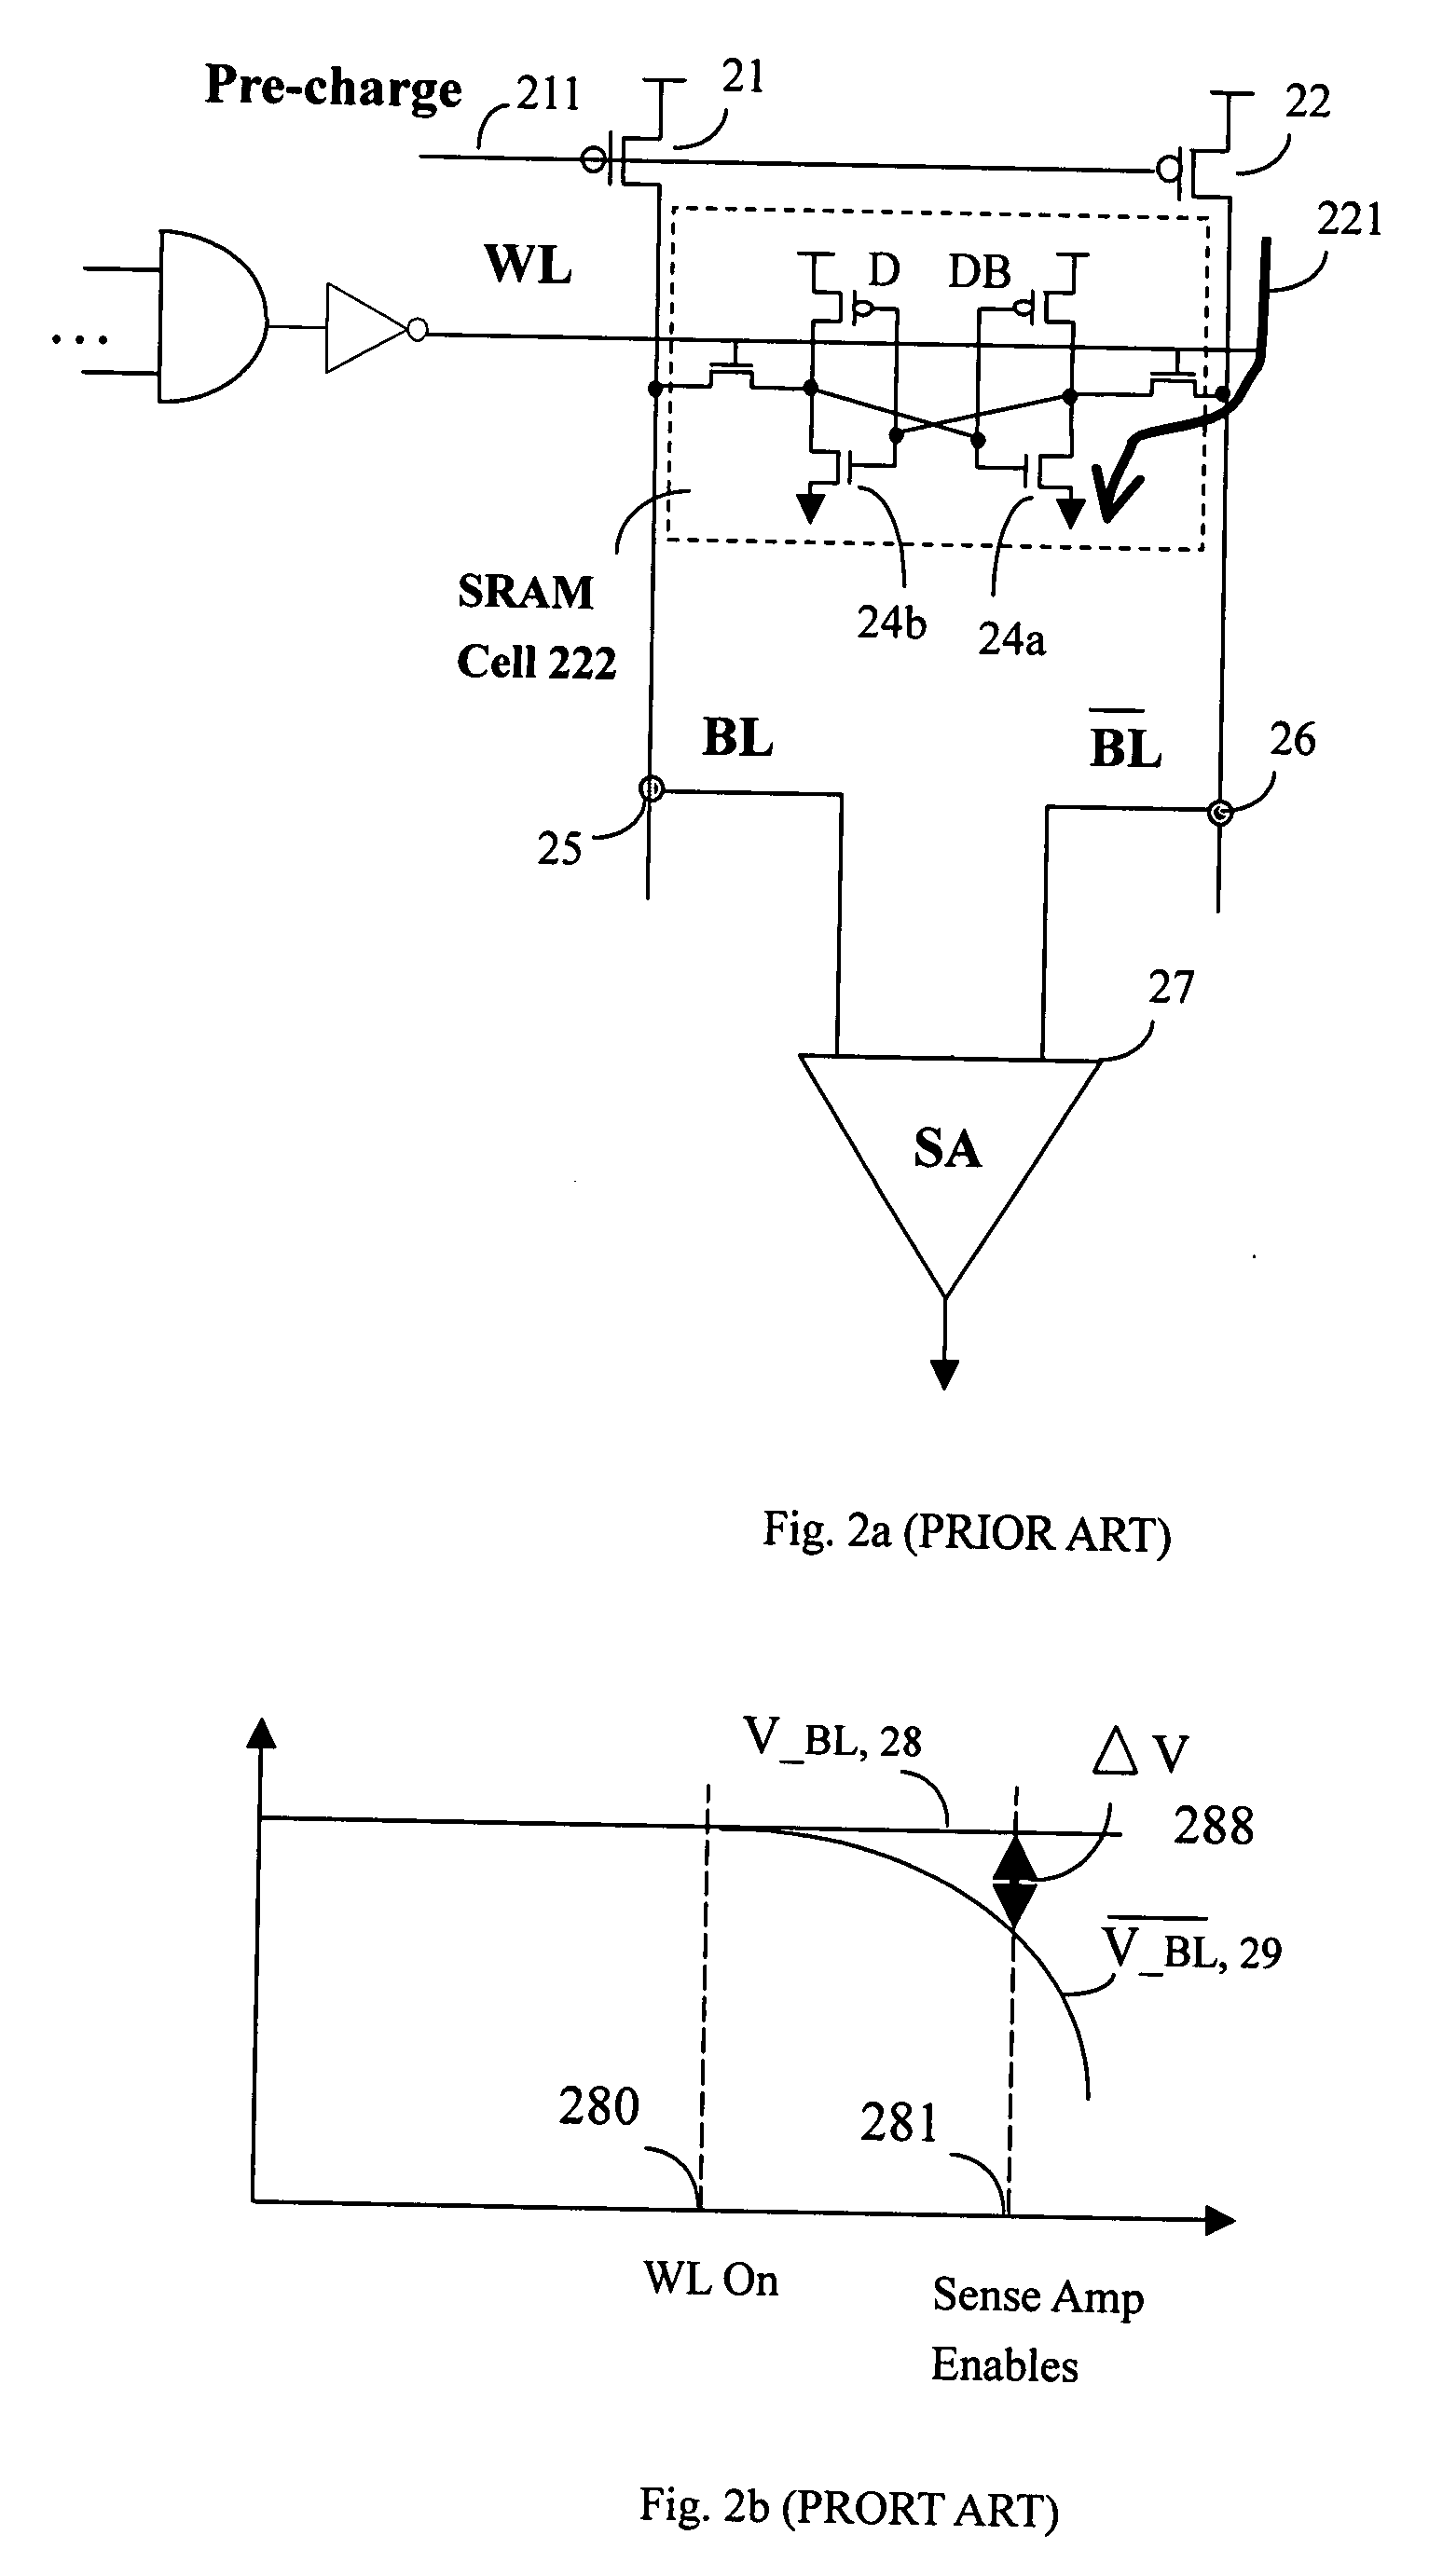 Sensing scheme for the semiconductor memory